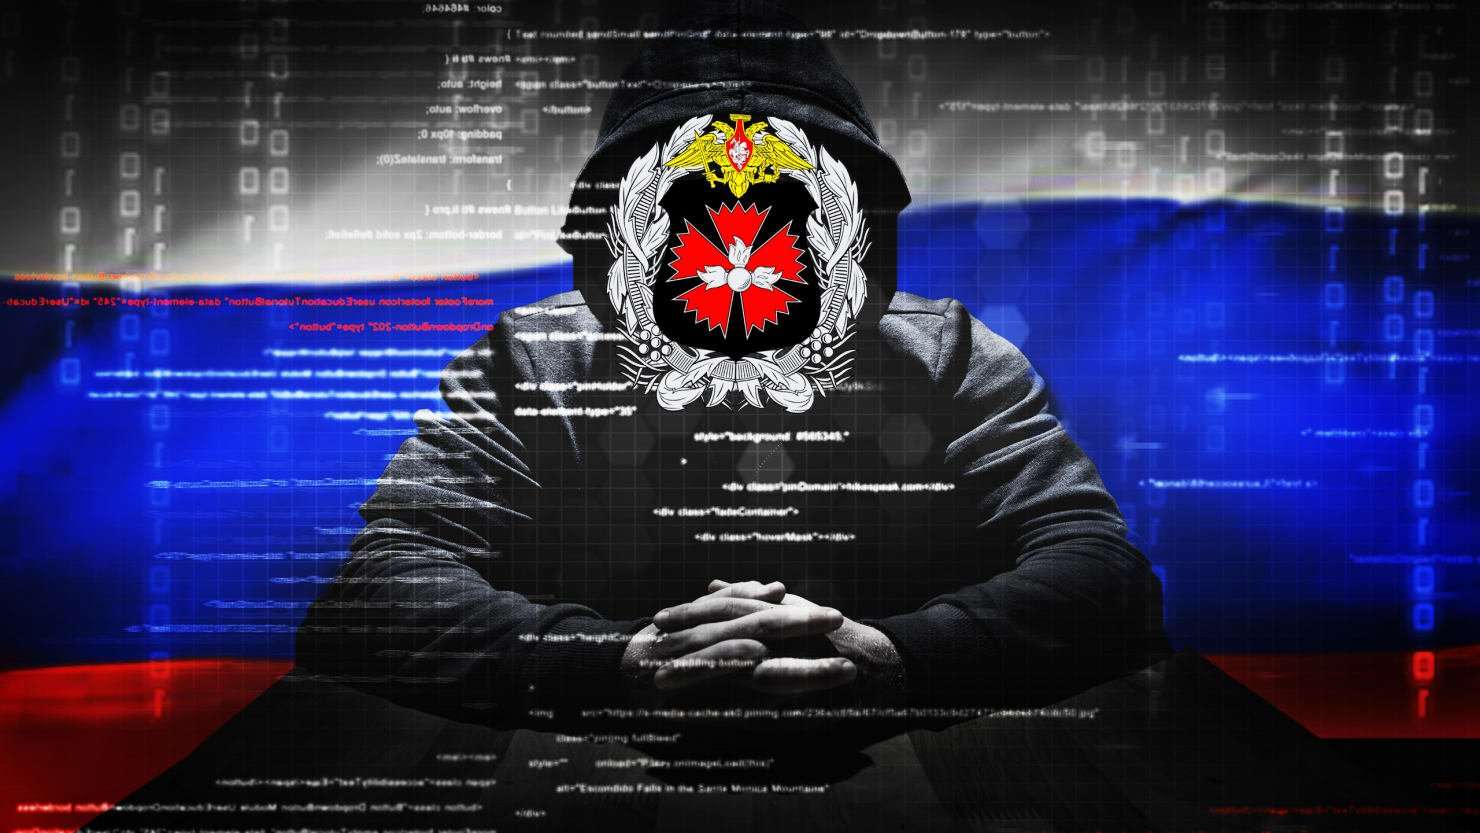 image for EXCLUSIVE: ‘Lone DNC Hacker’ Guccifer 2.0 Slipped Up and Revealed He Was a Russian Intelligence Officer